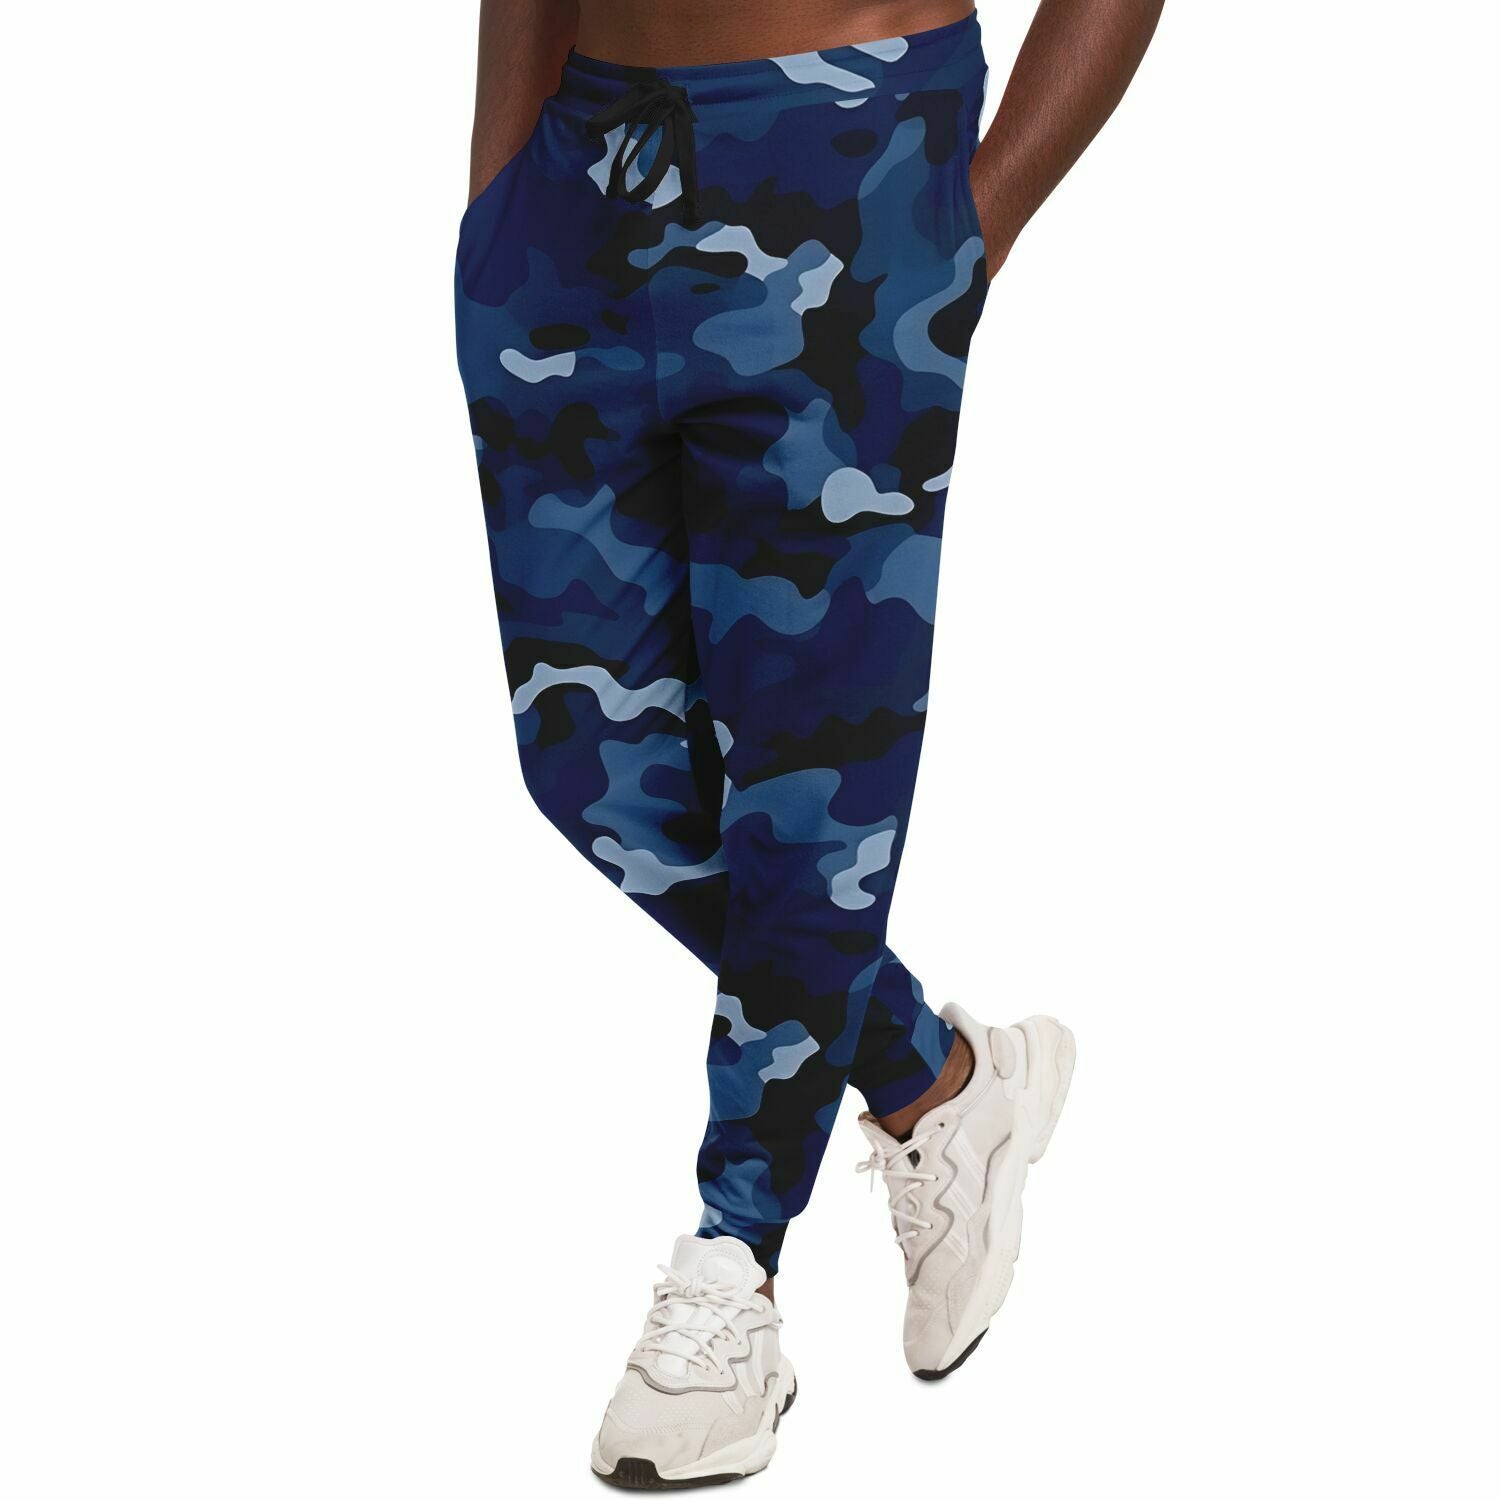 ALWAYS Sweats Will Be Your New Favorite Camo Jogger Pants